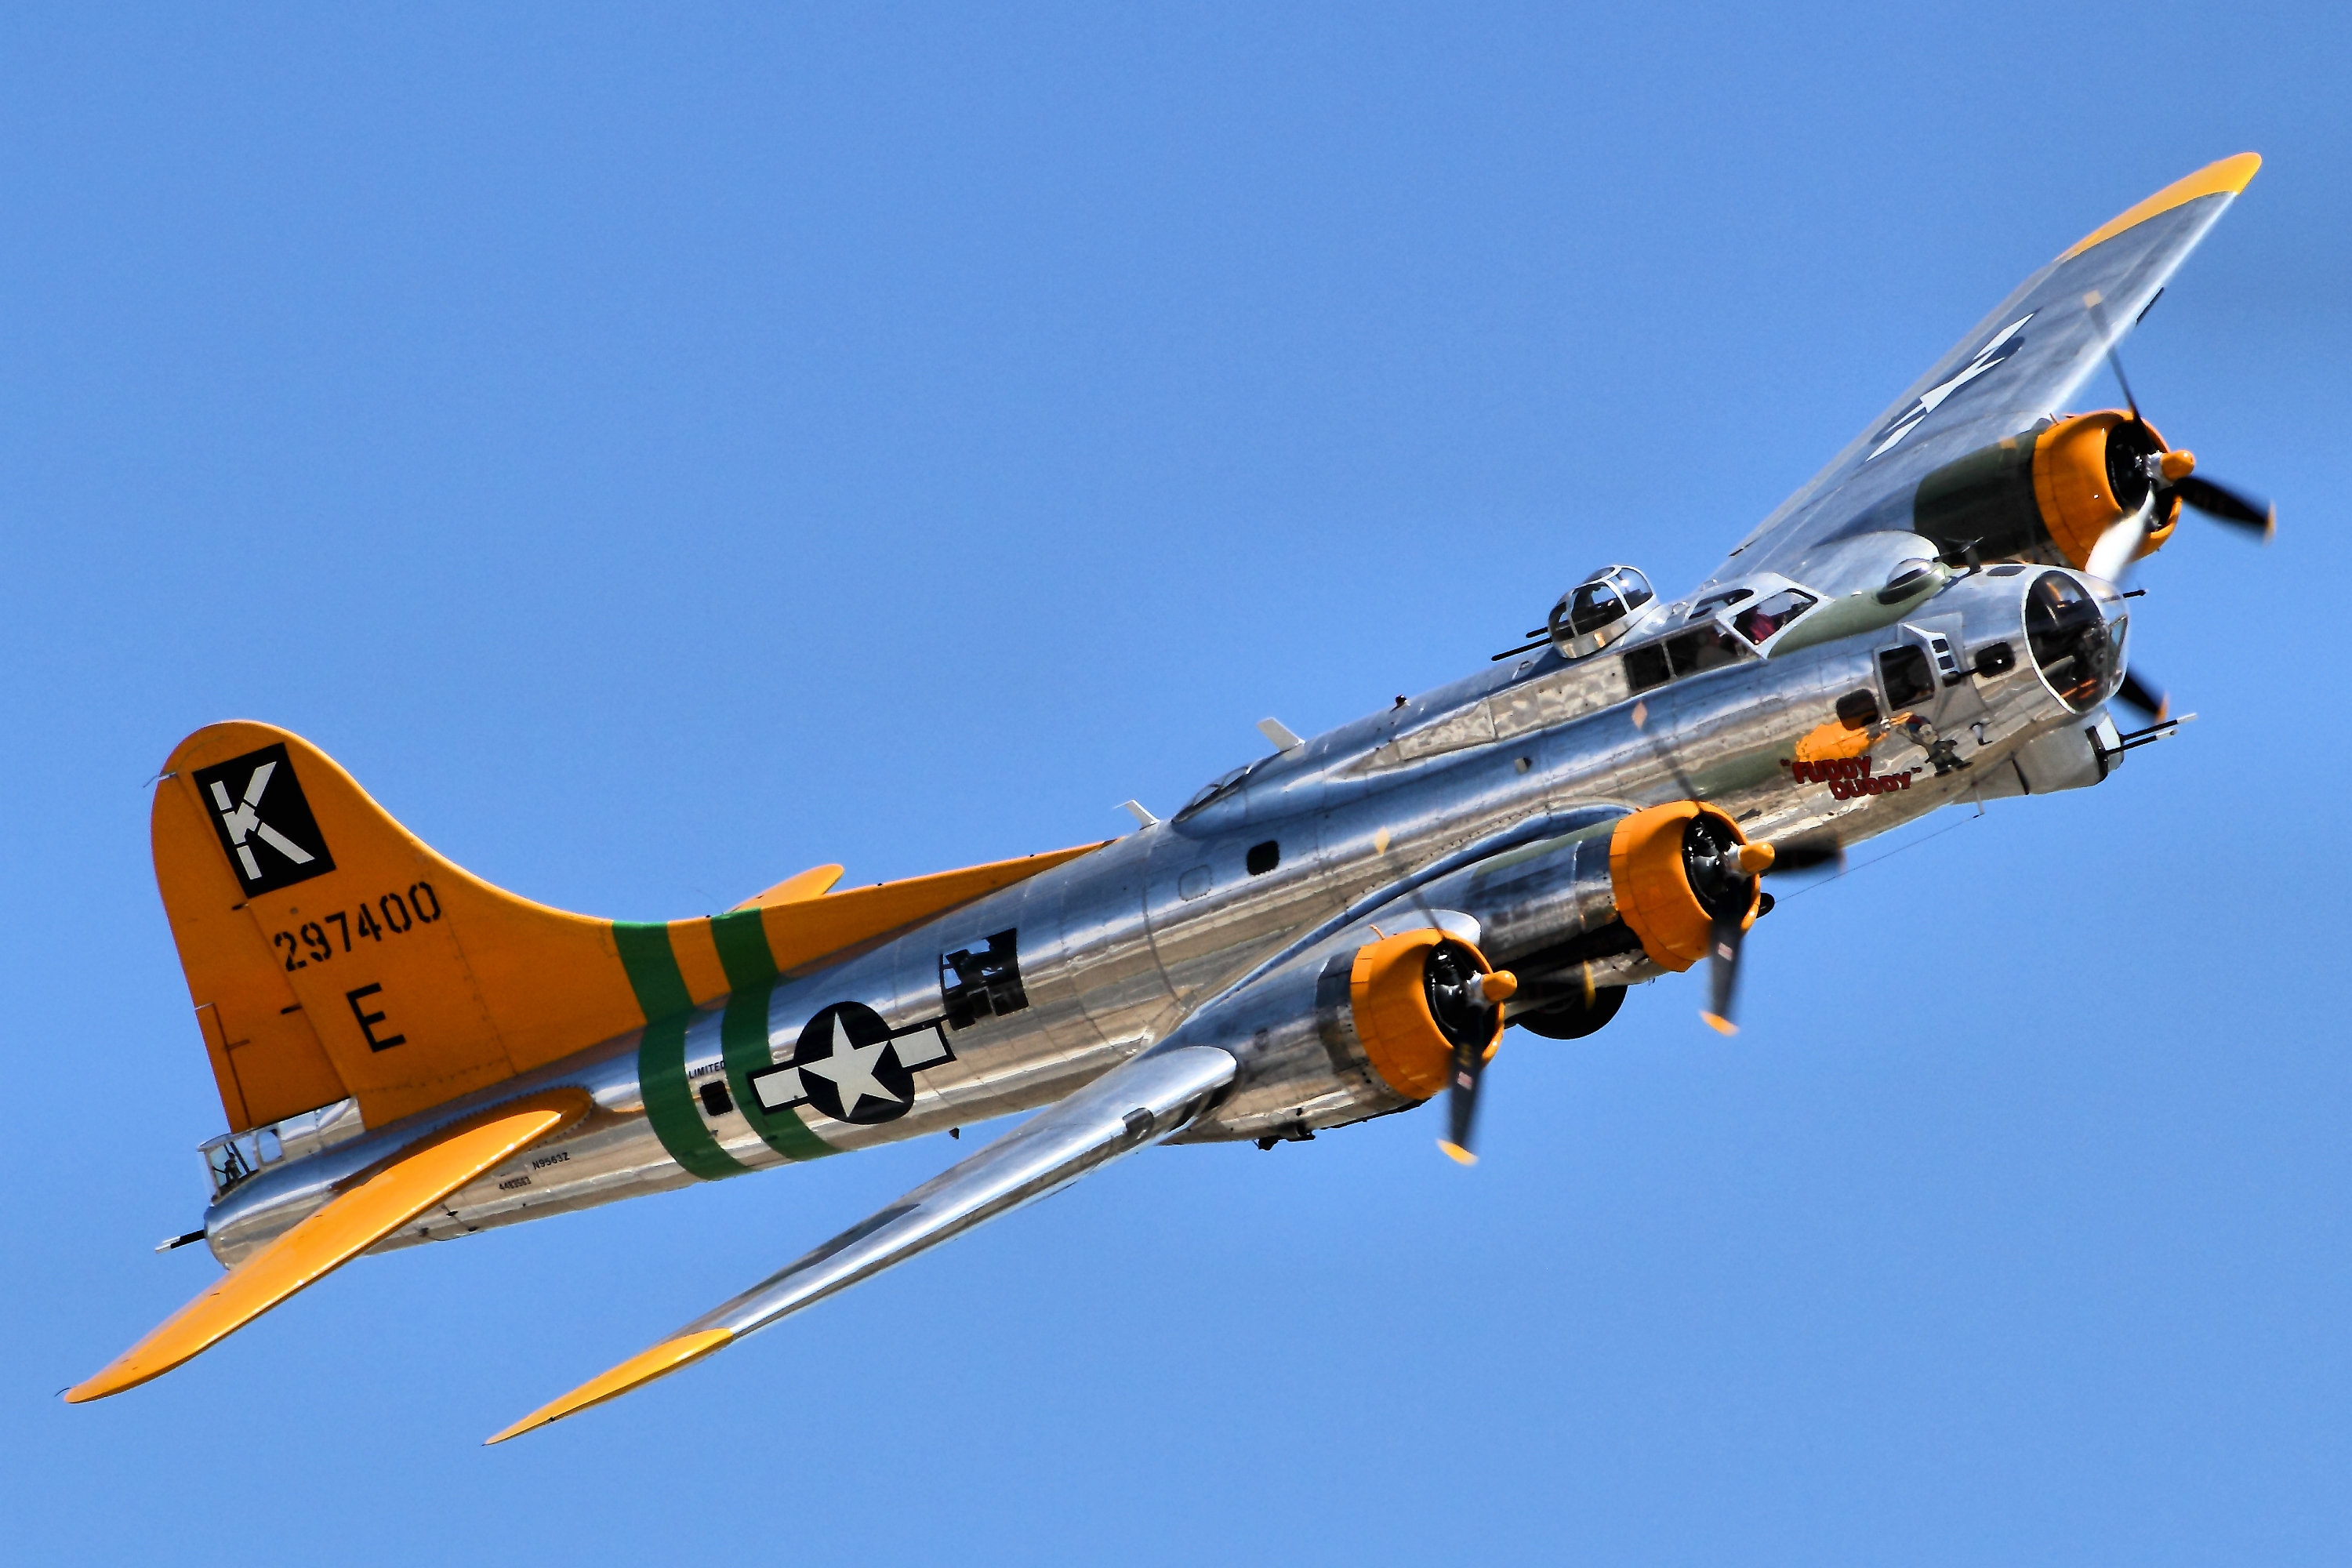 B 17 Flying Fortress Wikimedia Commons